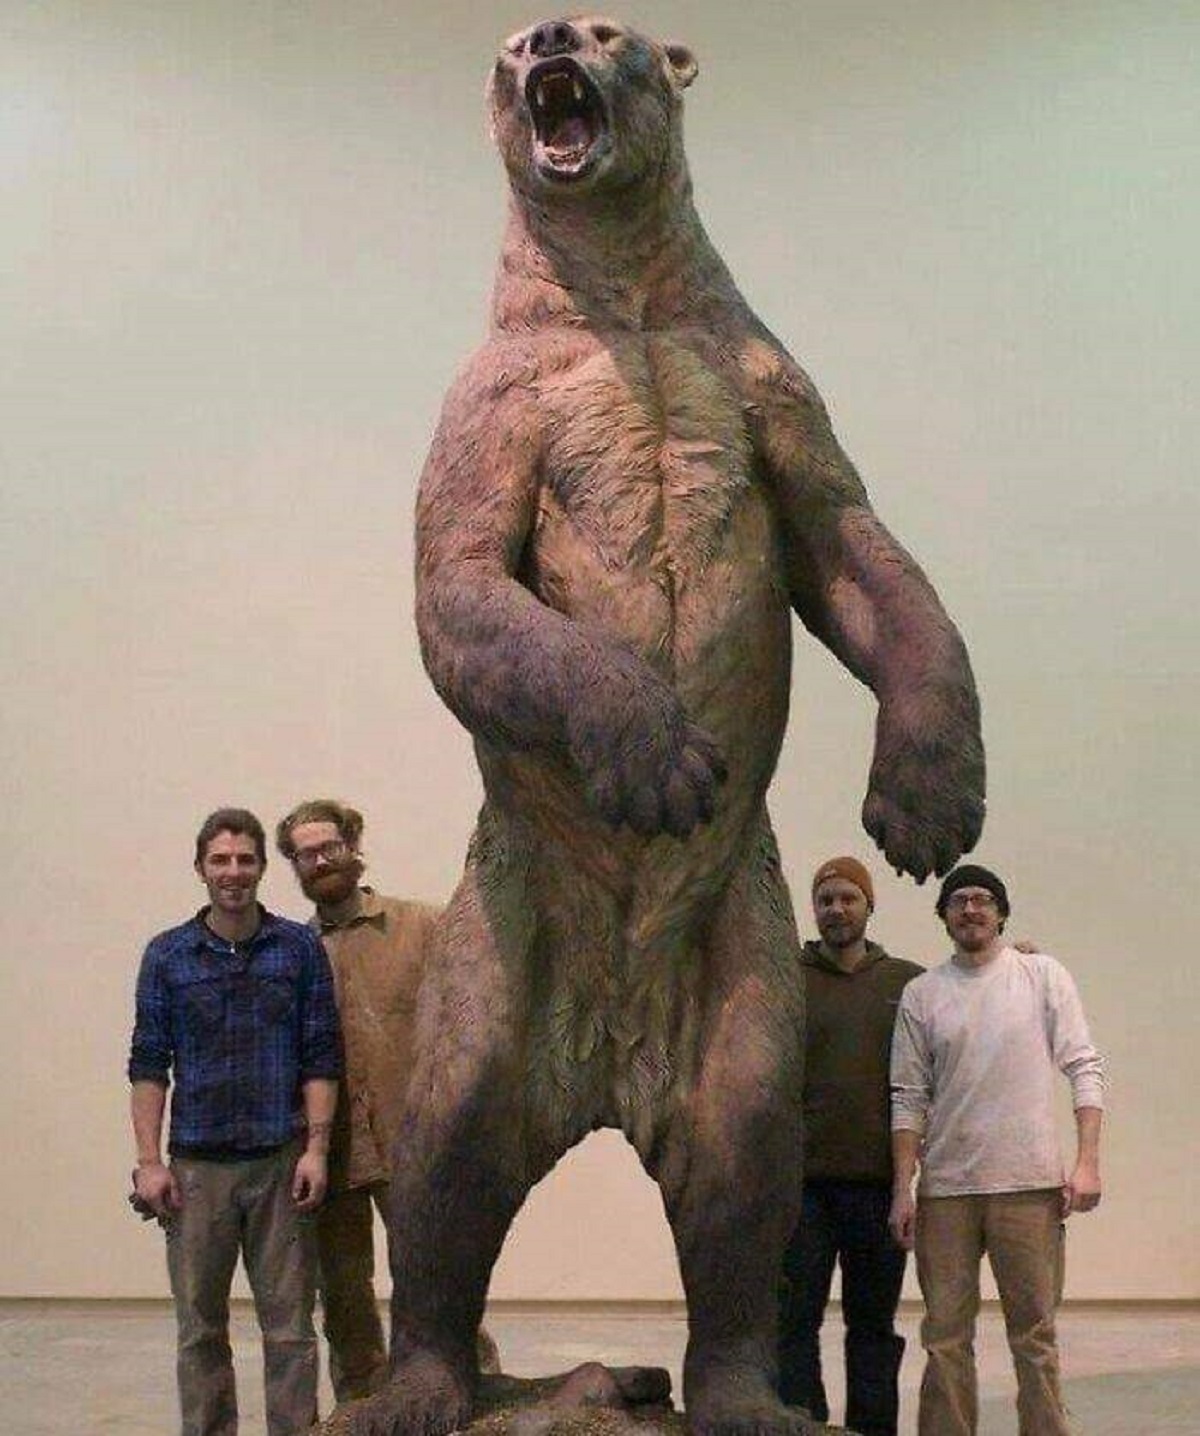 "A Replicated Sculpture Of The Giant Short-Faced Bear, Which Inhabited A Significant Portion Of North America Until Approximately 11,000 Years Ago"

"These bears could reach a towering height of 12 feet when standing upright."